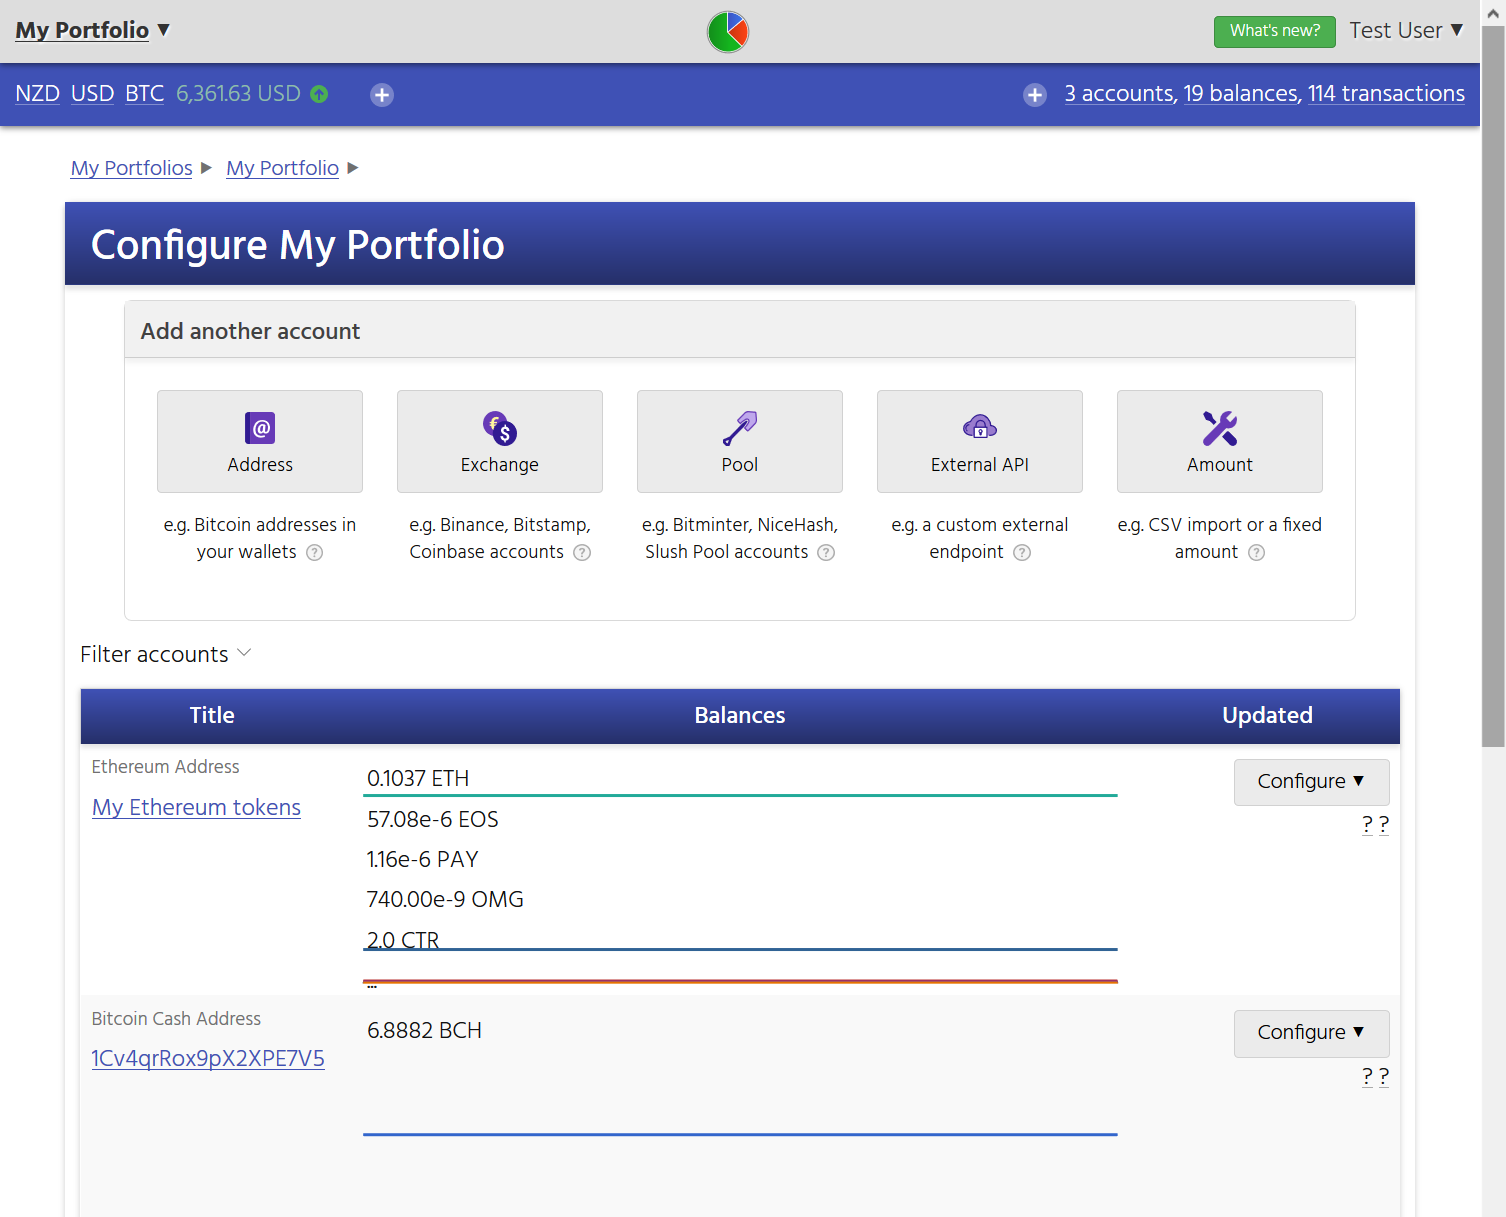 Screenshot showing the CryptFolio wizard interface to add new accounts, such as new exchange wallets, addresses, and mining pools.